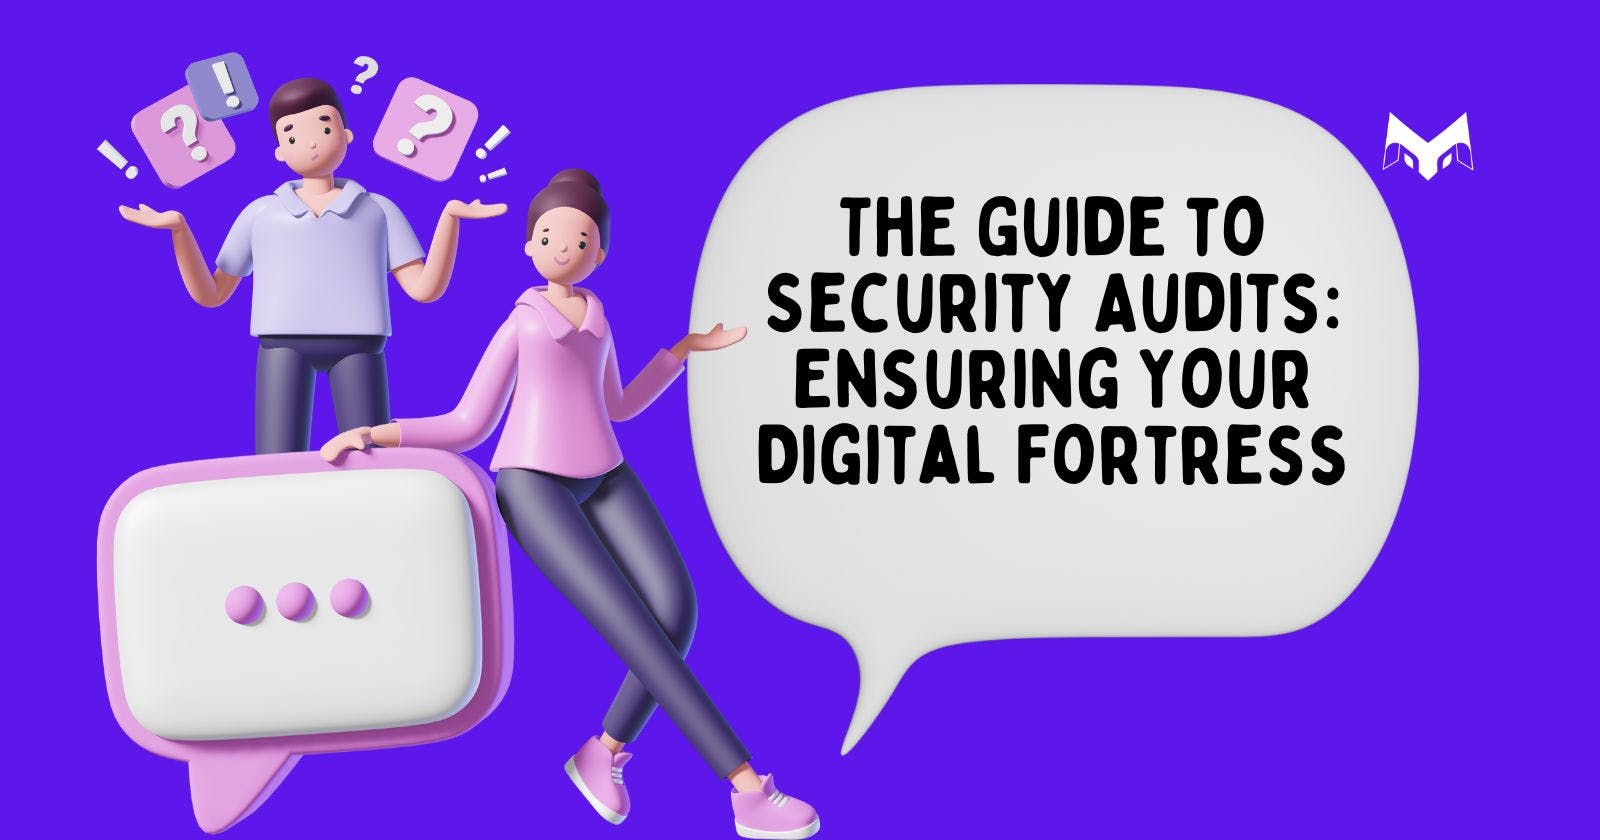 The Guide to Security Audits: Ensuring Your Digital Fortress